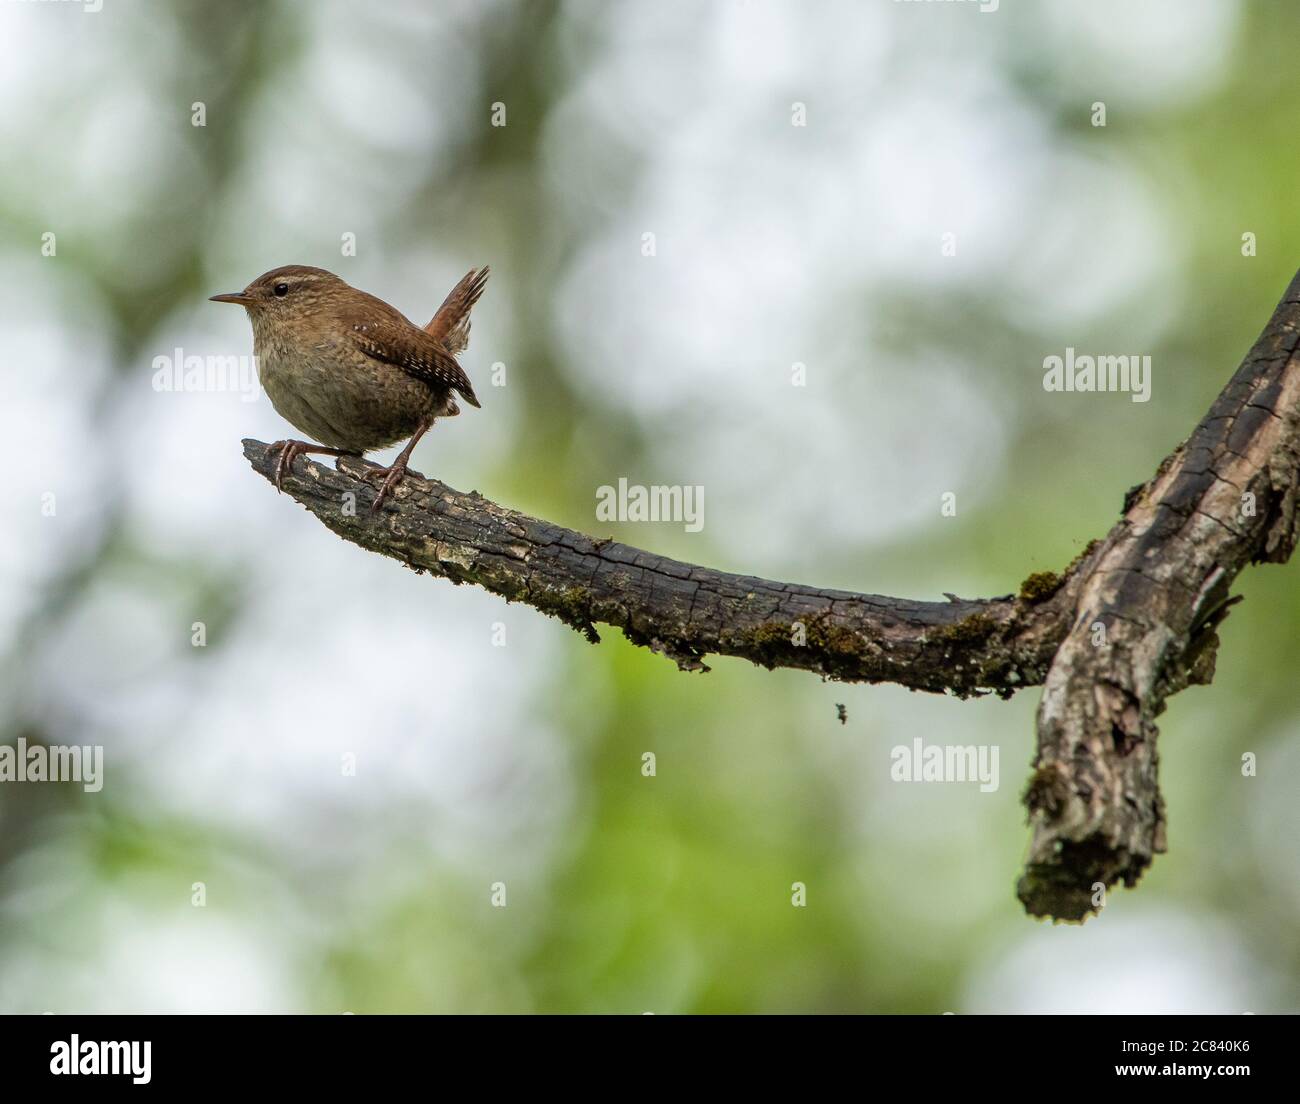 A wren perched on a dead branch, Chipping, Preston, Lancashire, UK Stock Photo